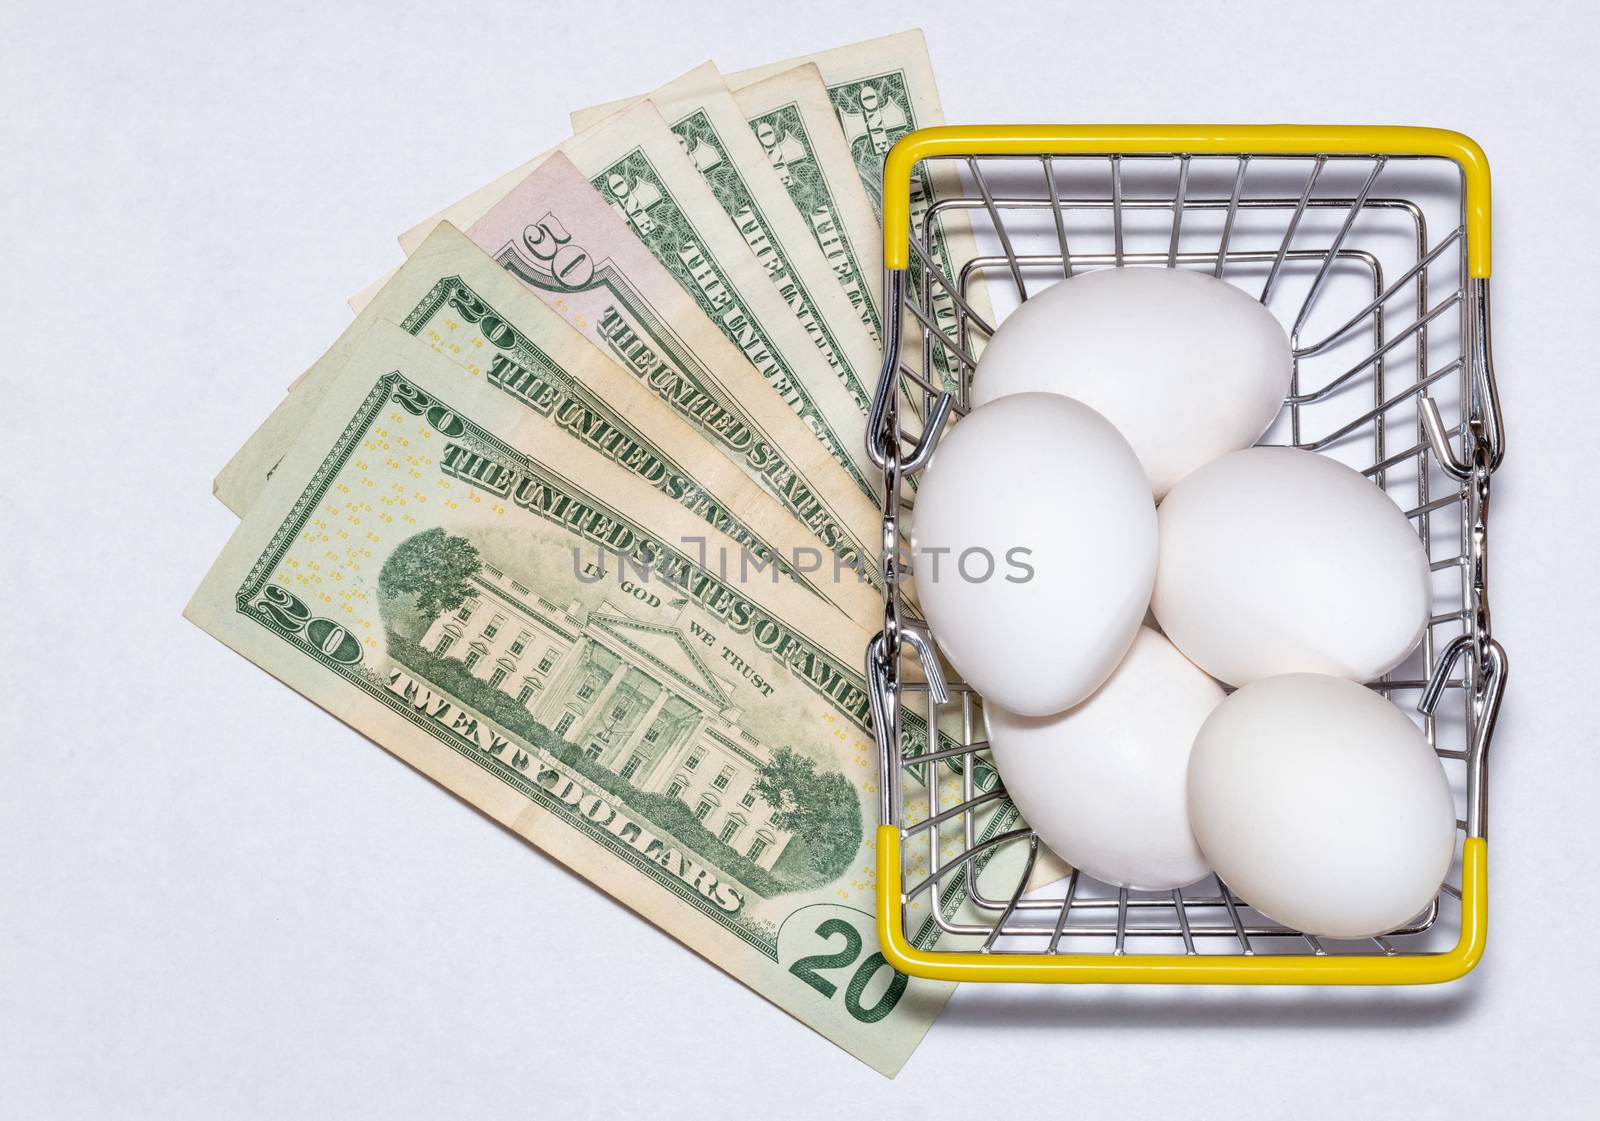 Fresh eggs in a shopping cart with various US dollar bills underneath it. Shopping, purchasing, and food delivery concept. White background. Close up shot. Isolated.